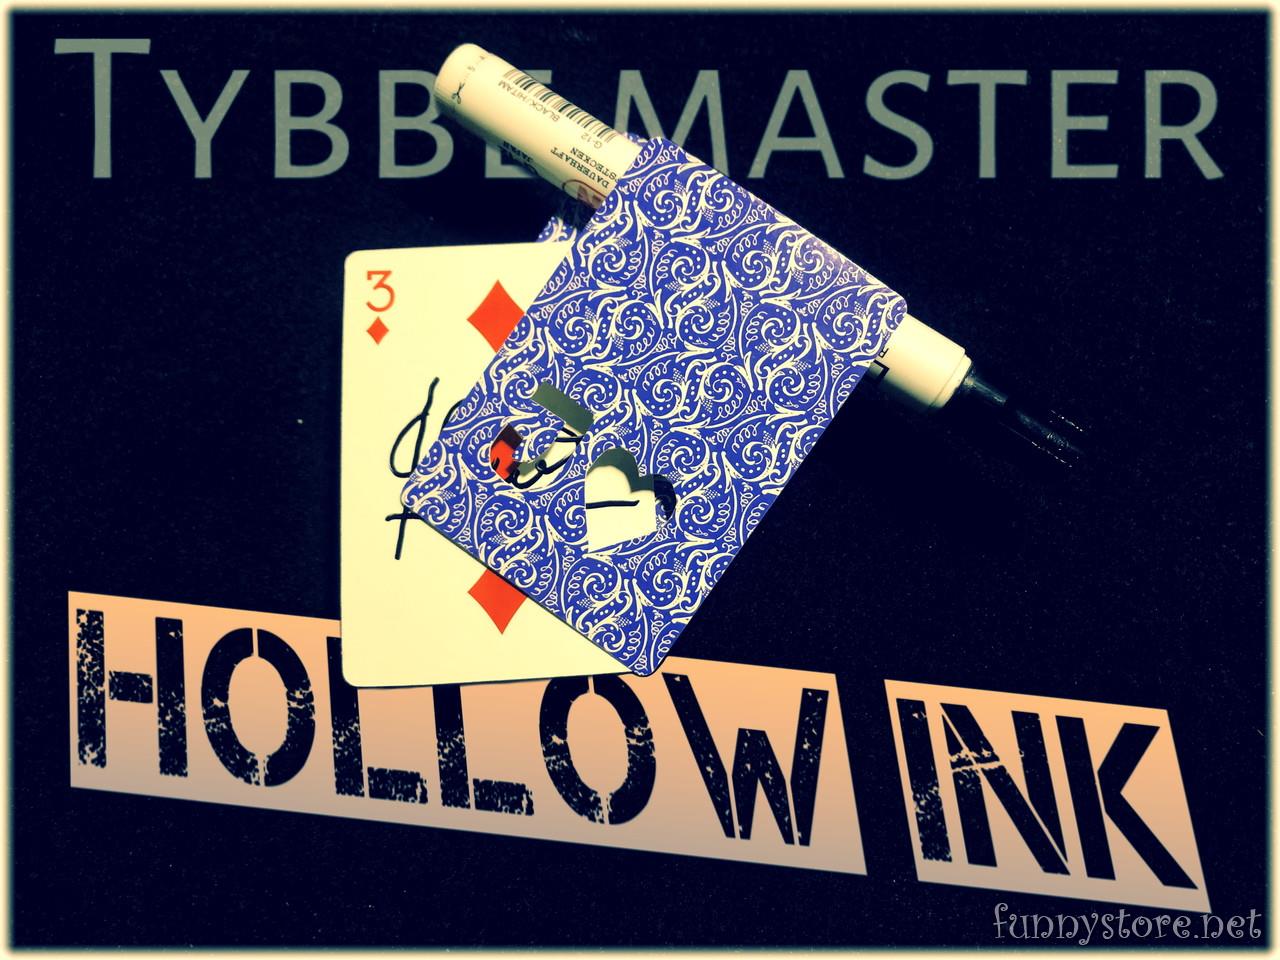 Tybbe master - Hollow ink